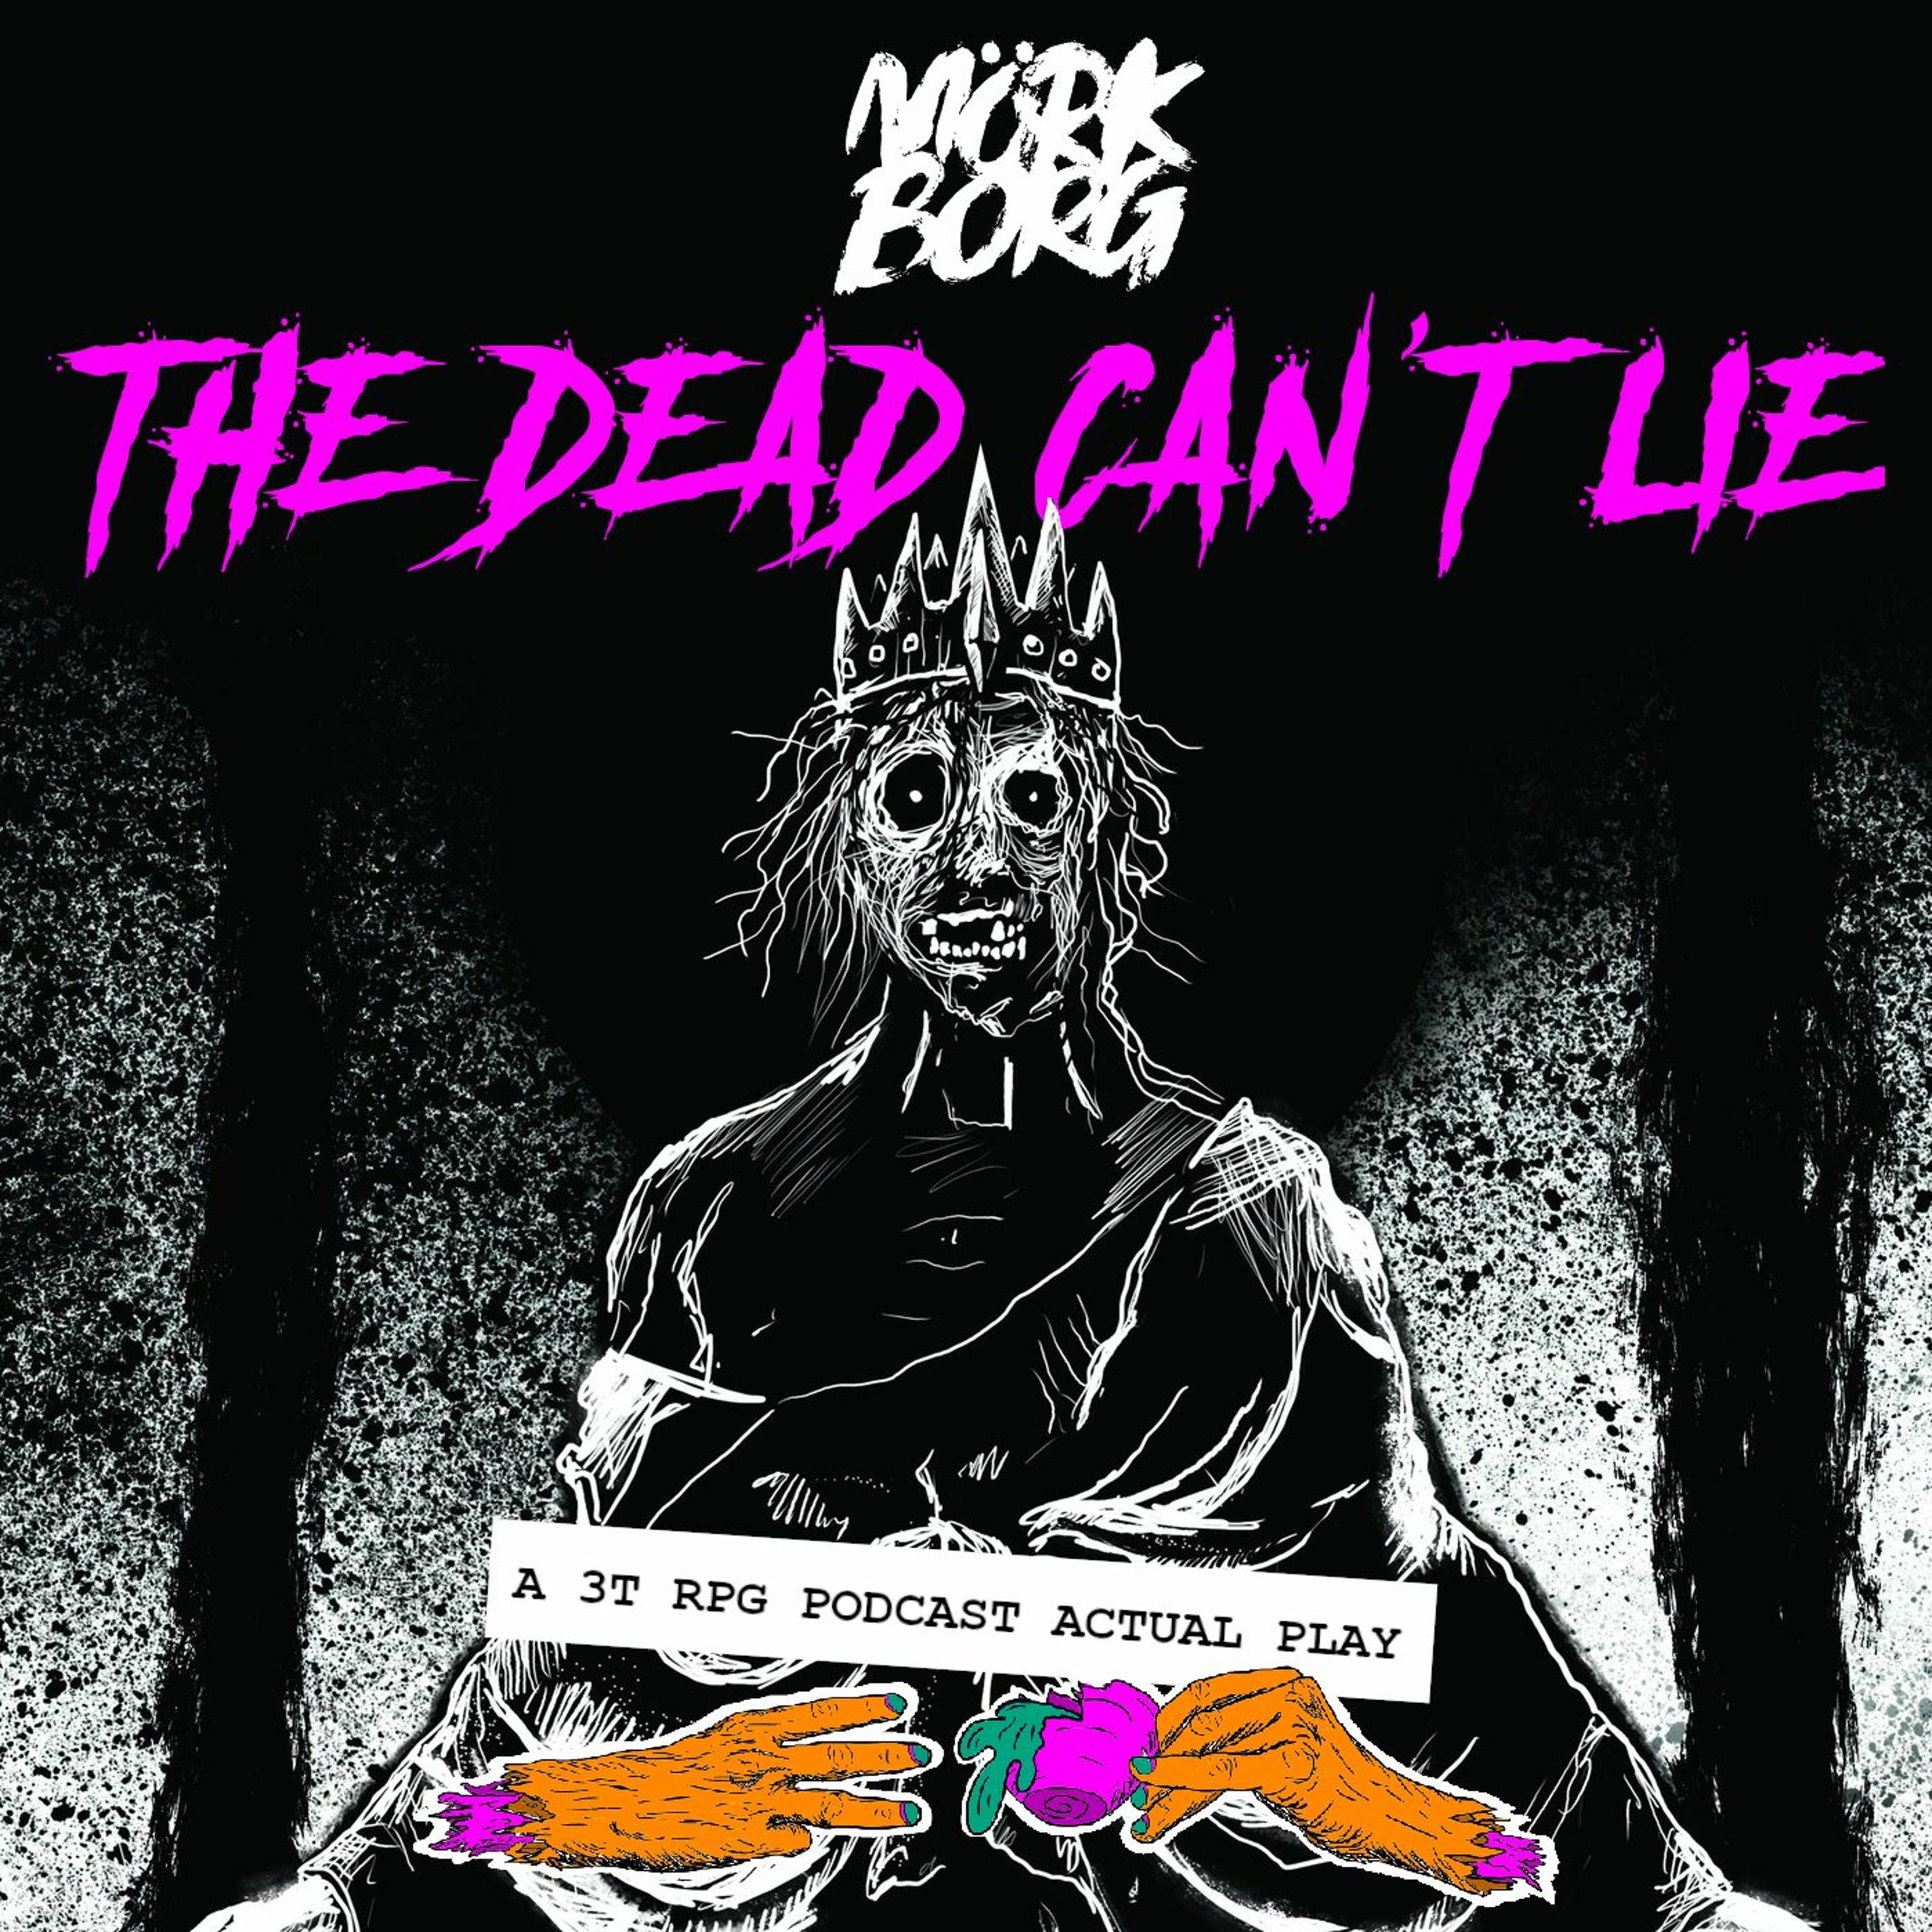 The Dead Can’t Lie 01 - The Executioner (Mörk Borg Actual Play)